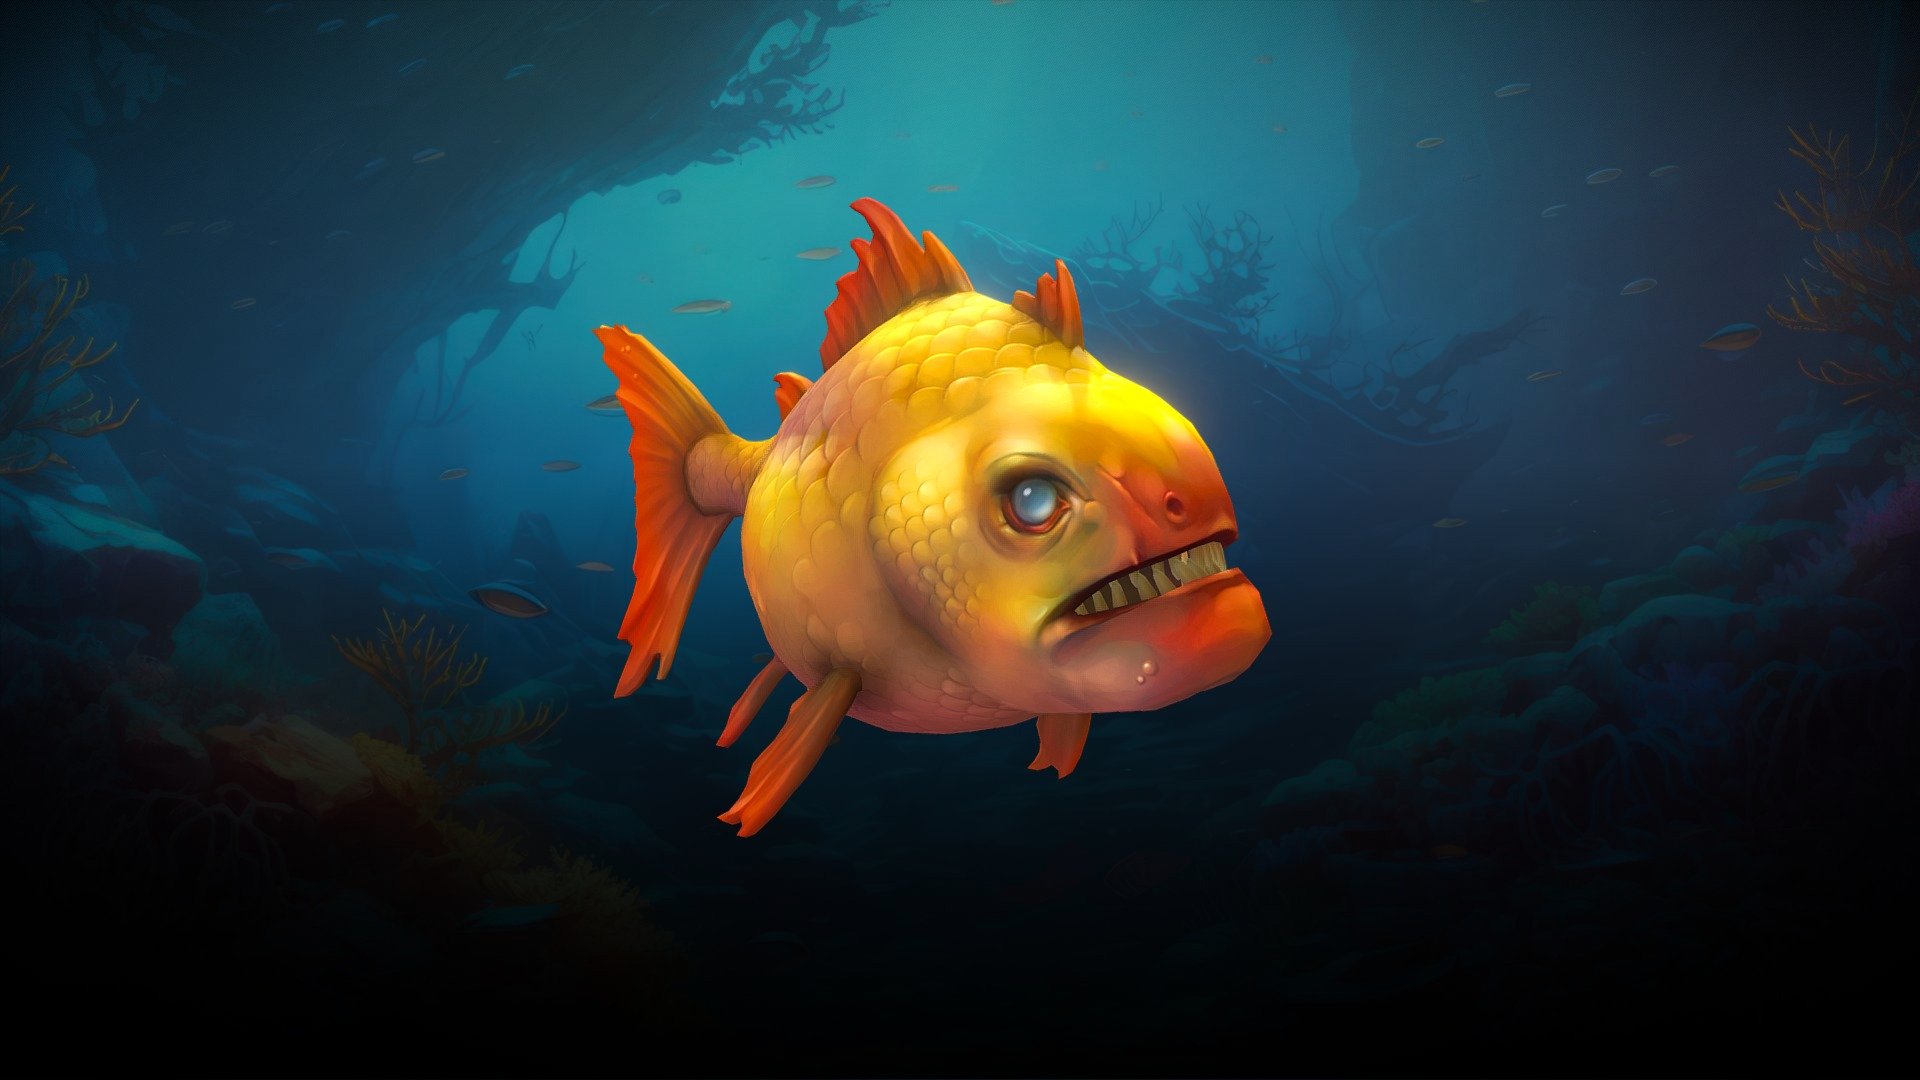 Stylized character for a project.

Software used: Zbrush, Autodesk Maya, Autodesk 3ds Max, Substance Painter - Stylized Piranha - 3D model by N-hance Studio (@Malice6731) 3d model